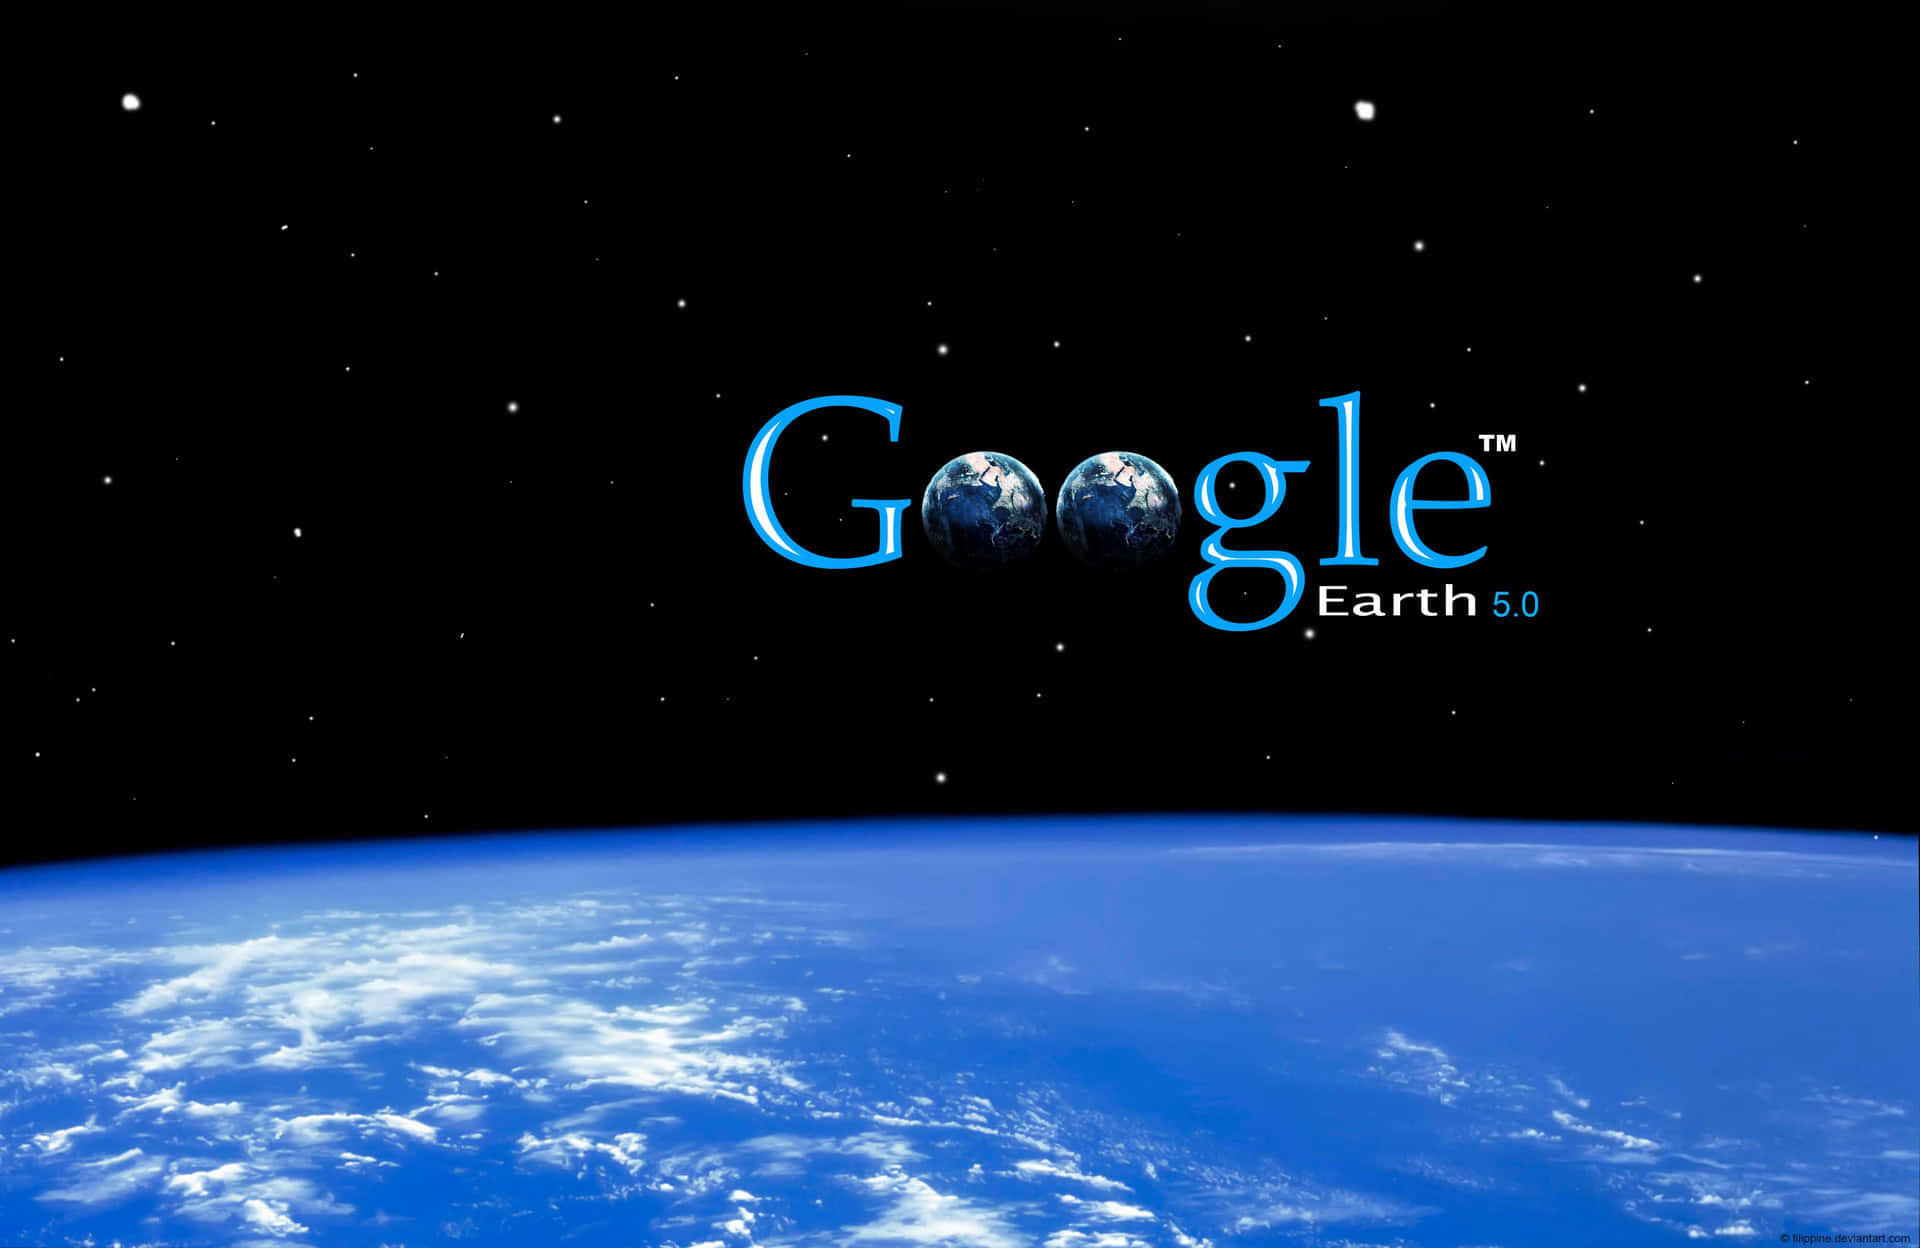 The Google Best Experience Wallpaper